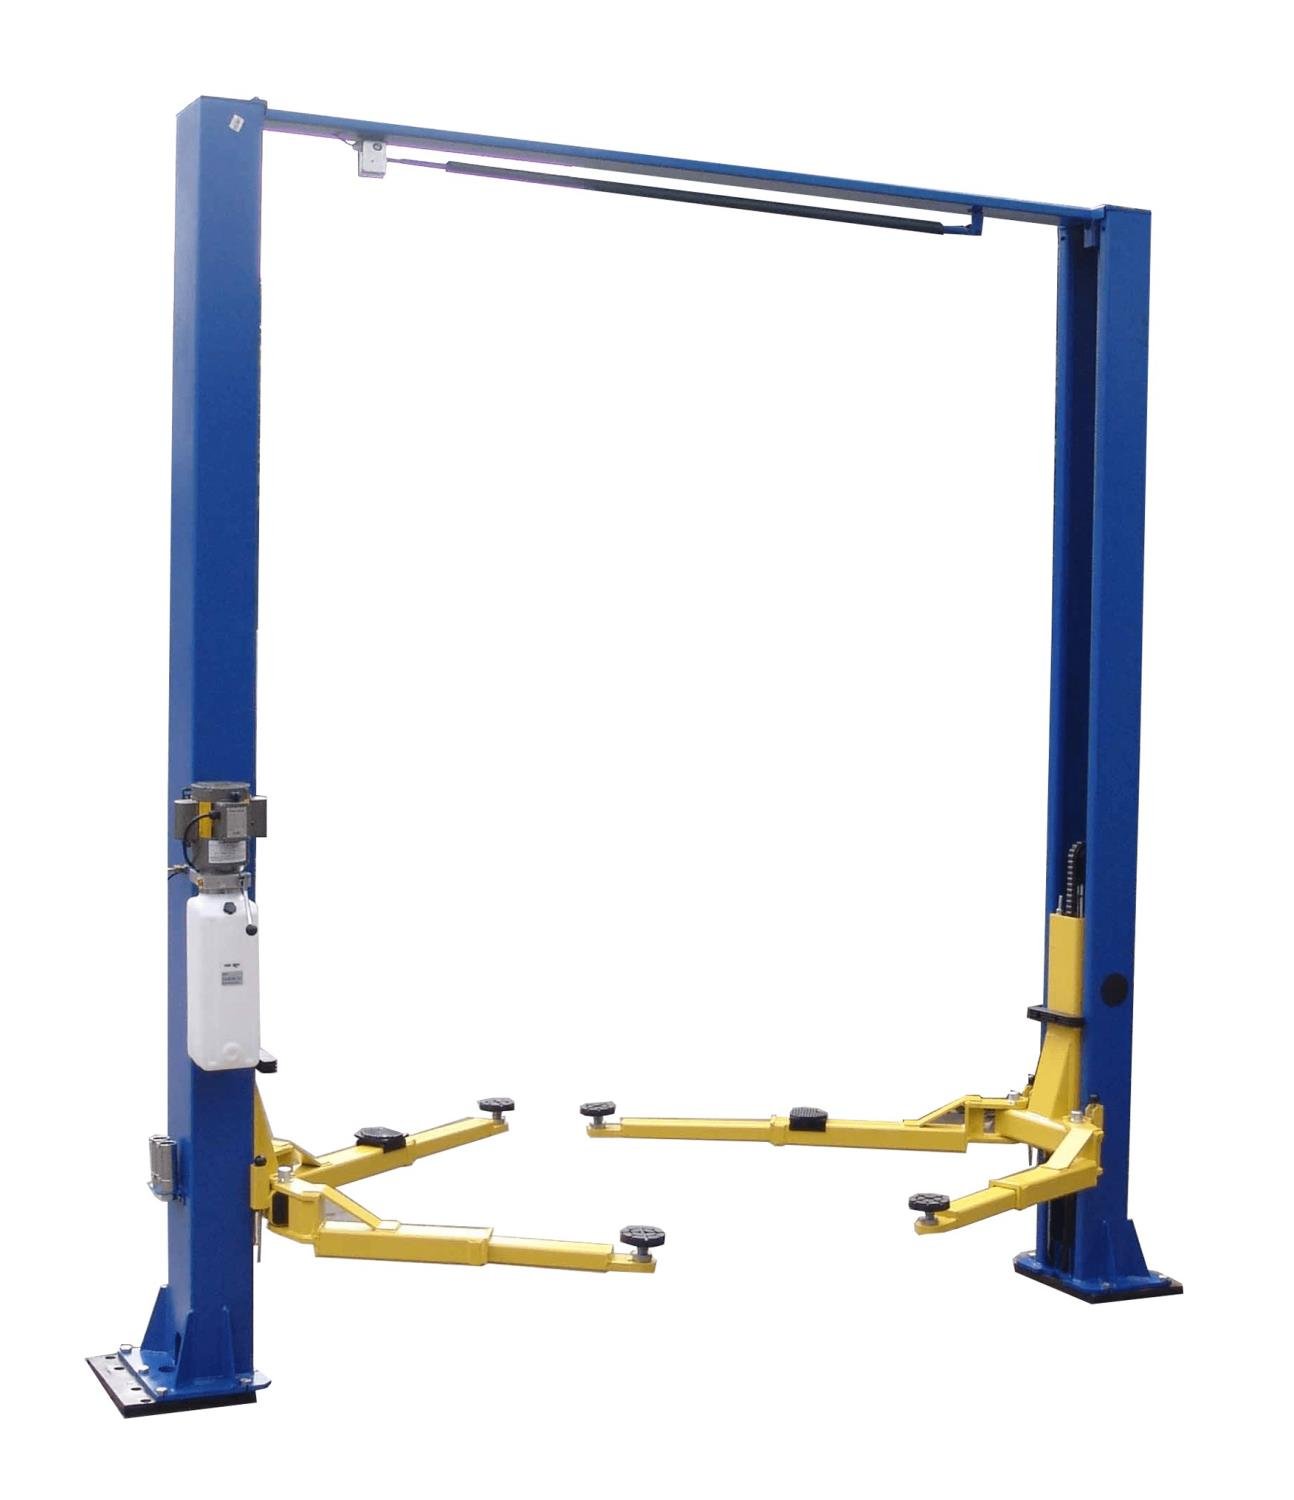 2-Post Symmetric Automotive Lift with 9,000 lbs. Lifting Capacity with Clear Floor